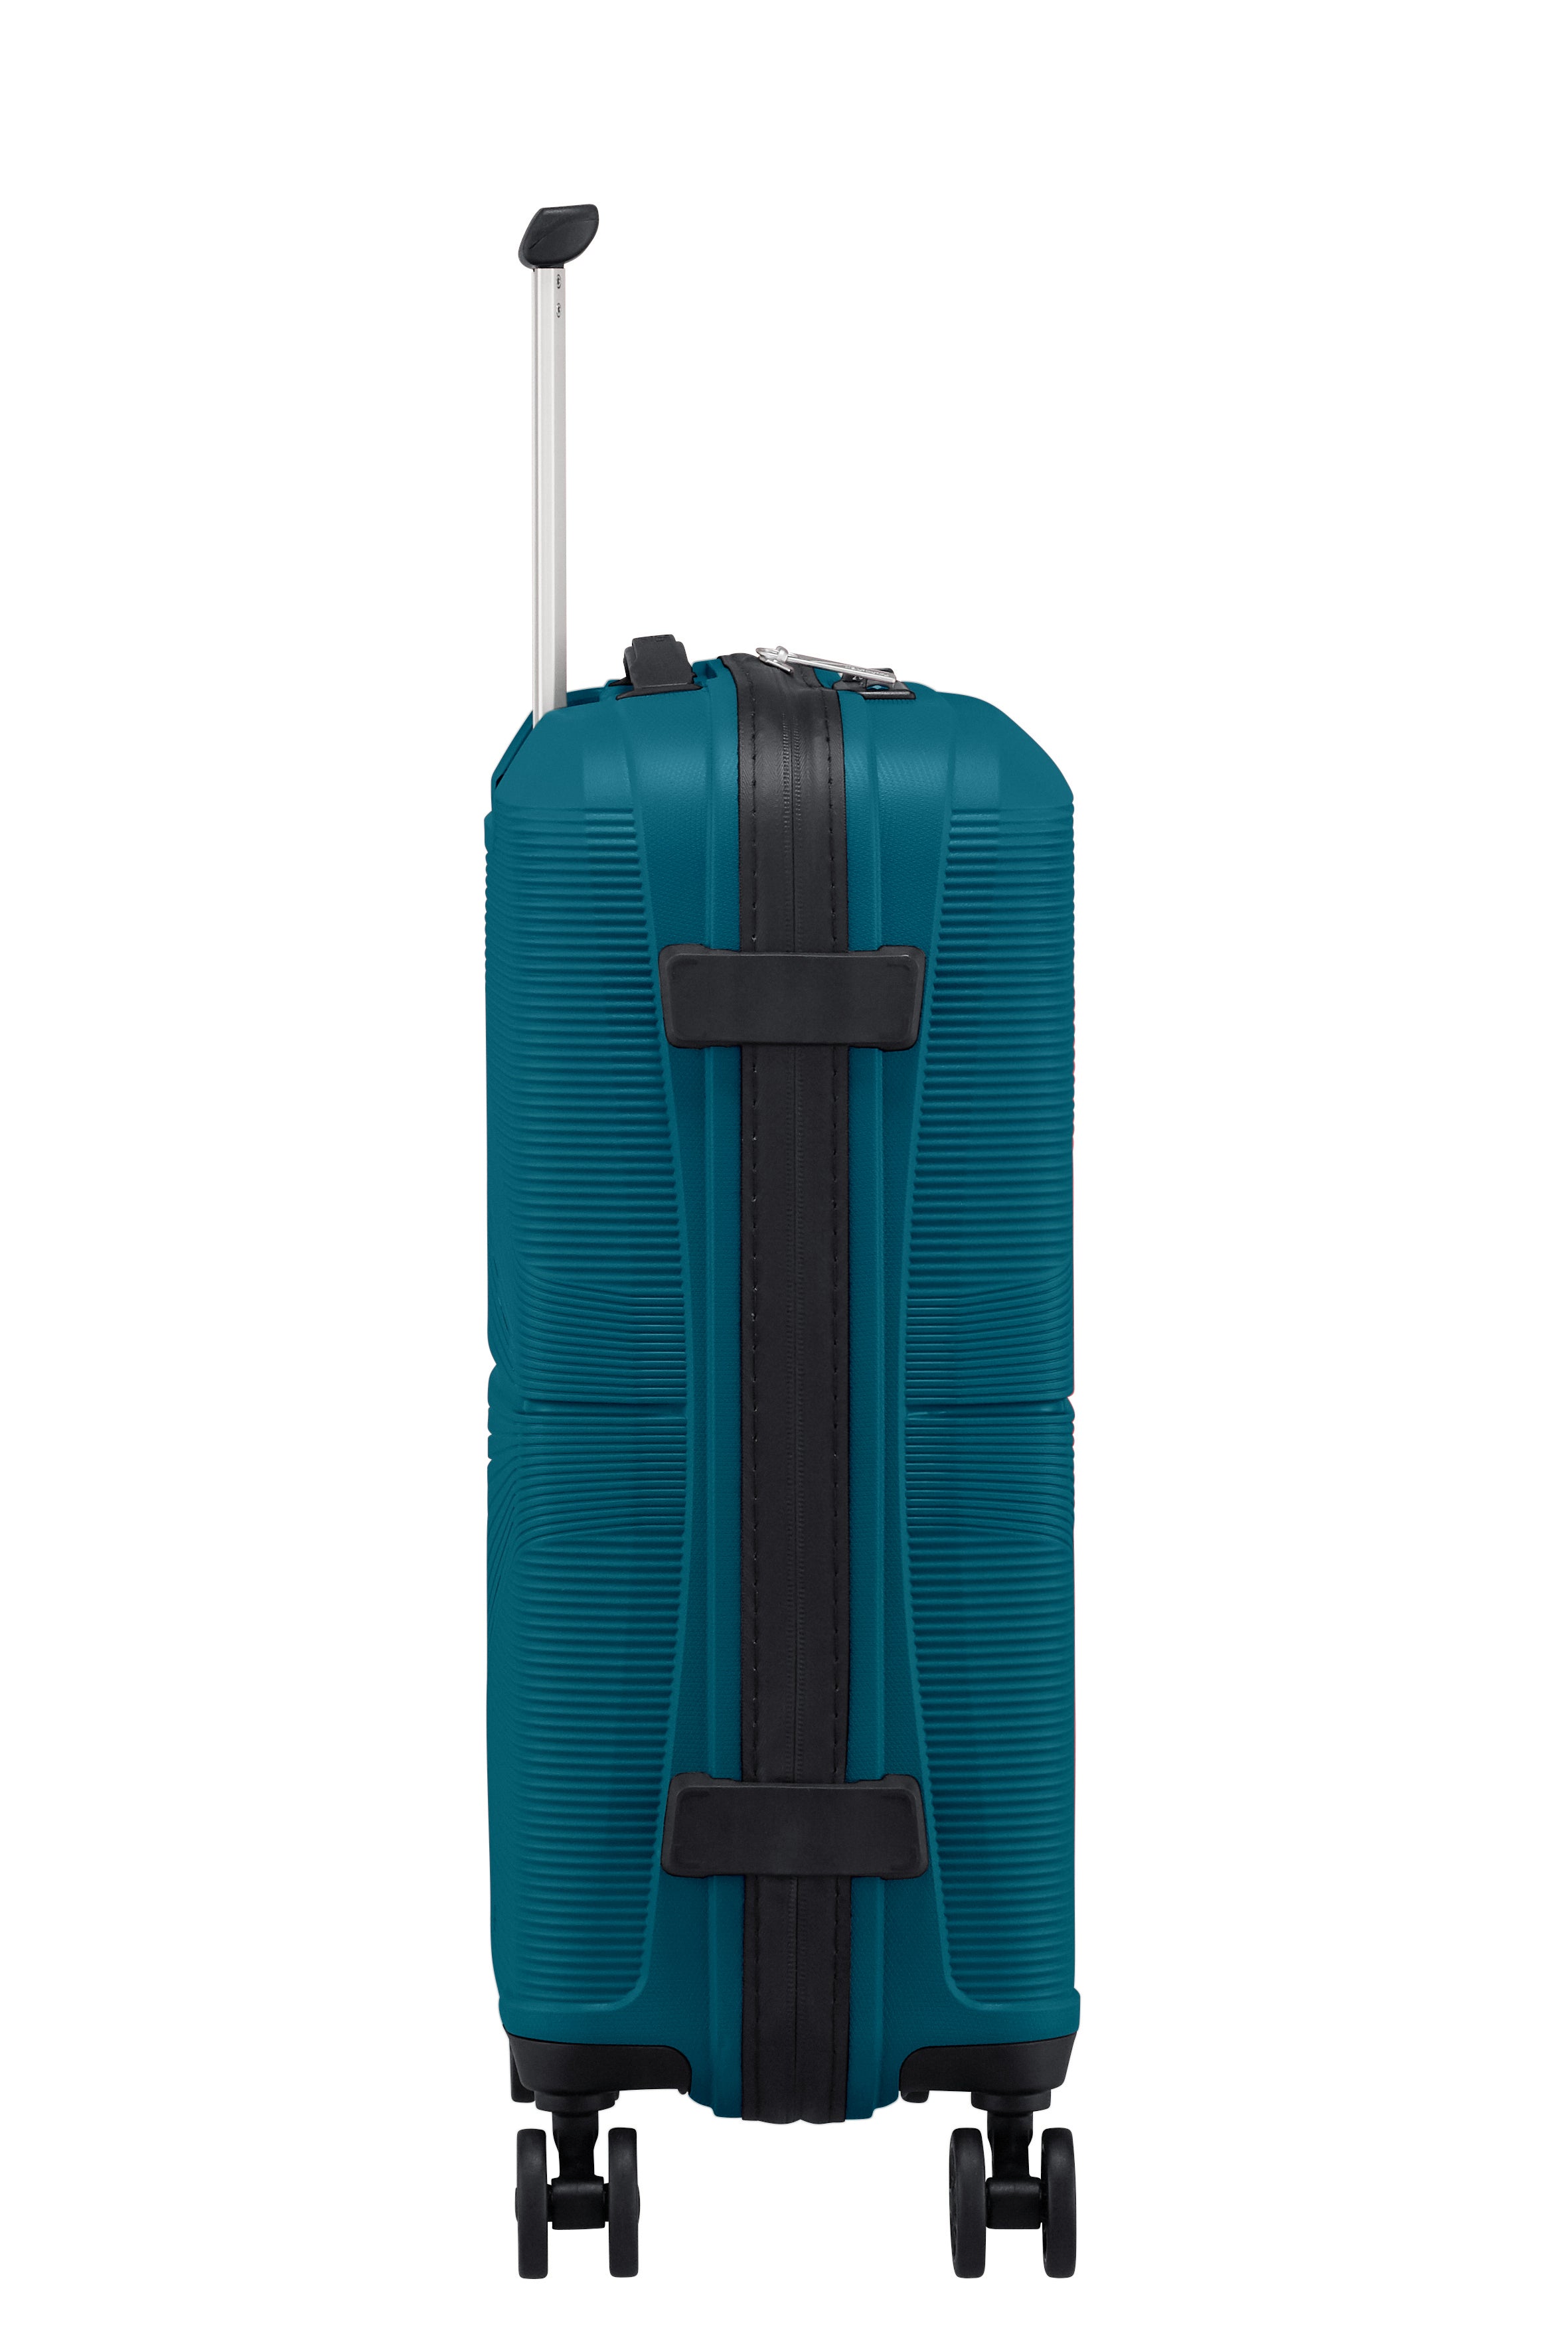 American Tourister - Airconic 55cm Small Suitcase - Deep Ocean-5